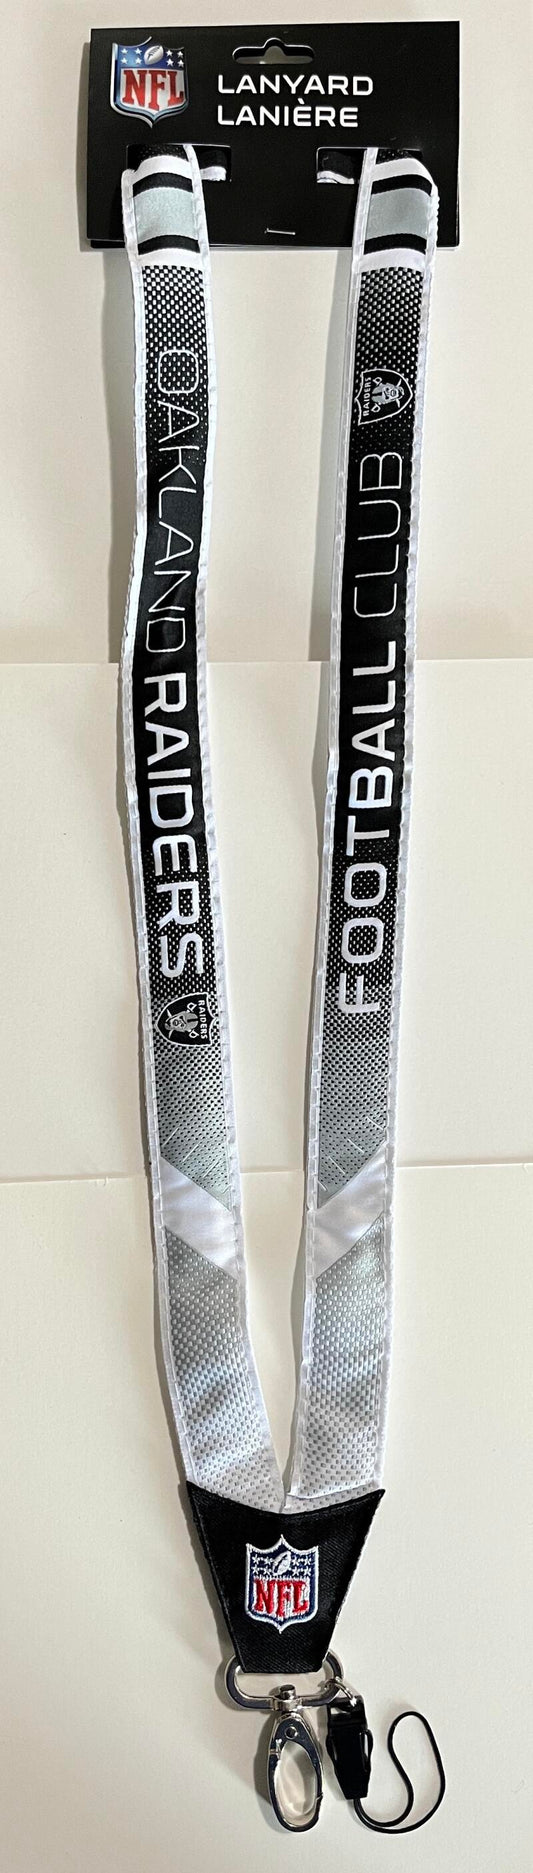 Oakland Raiders Woven Licensed NFL Football Lanyard Metal Clasp Image 1